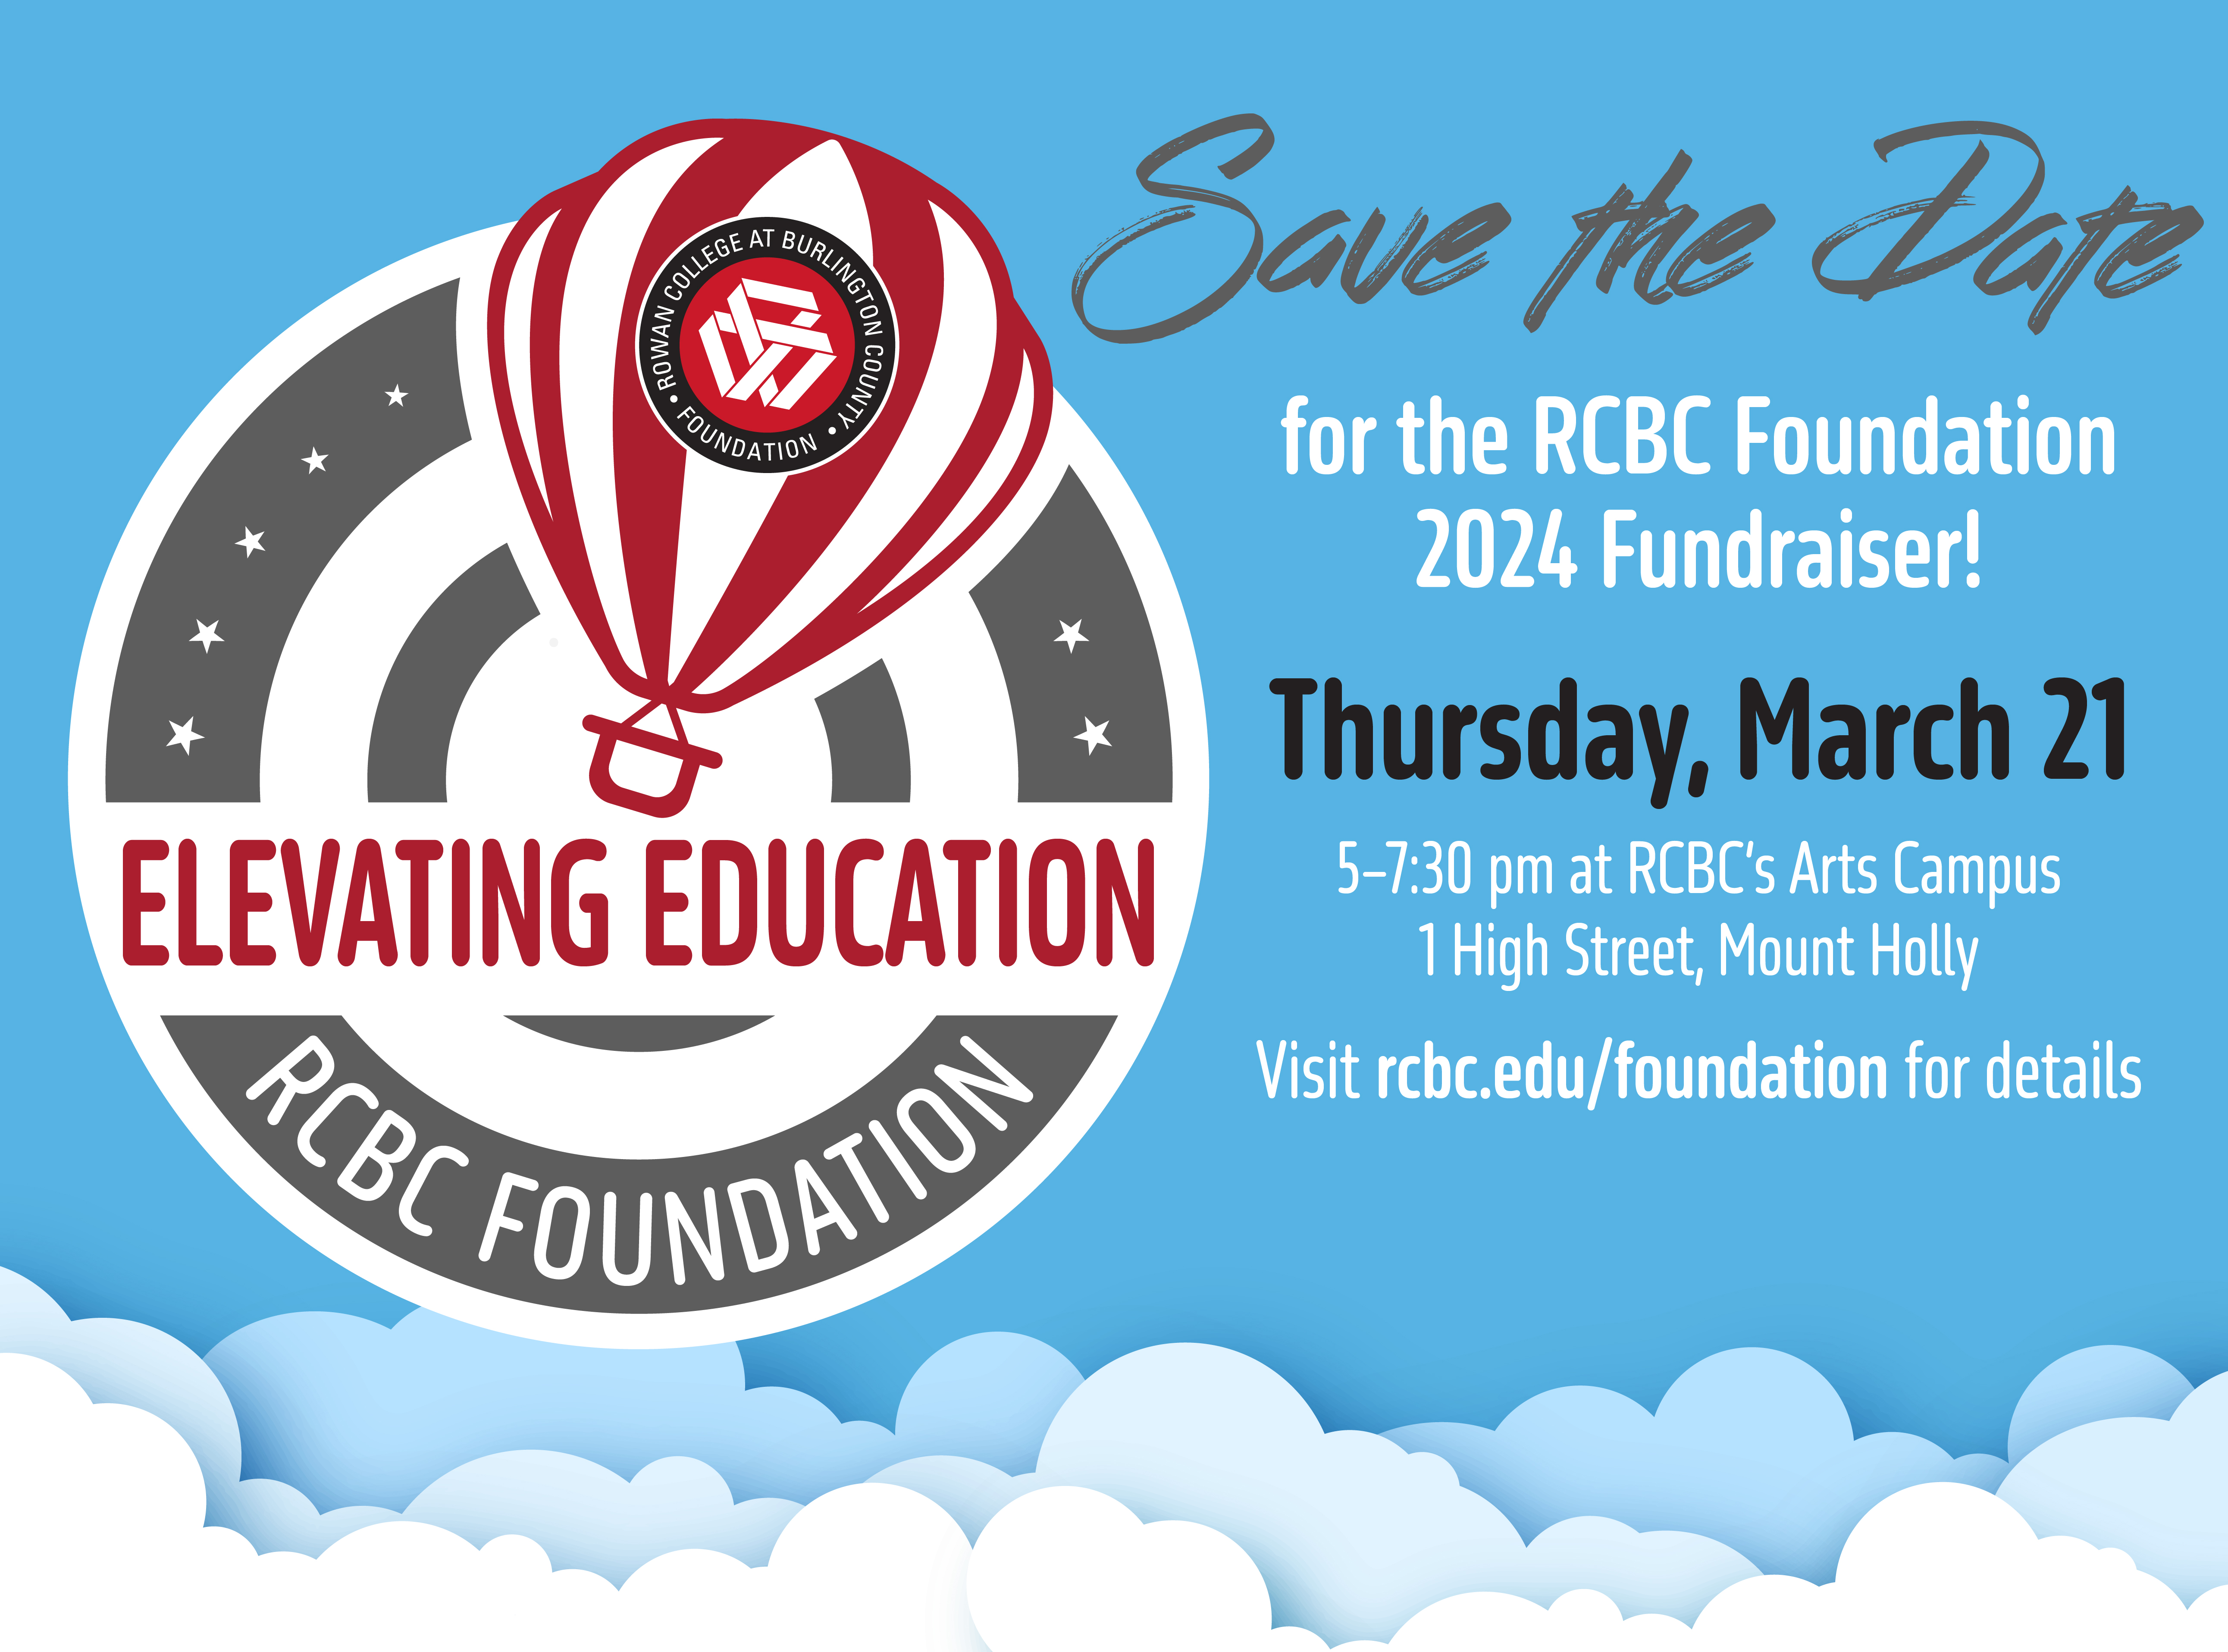 graphic design saying to save the date for the RCBC Foundation on march 21 from 5 to 7:30 pm in Mount Holly